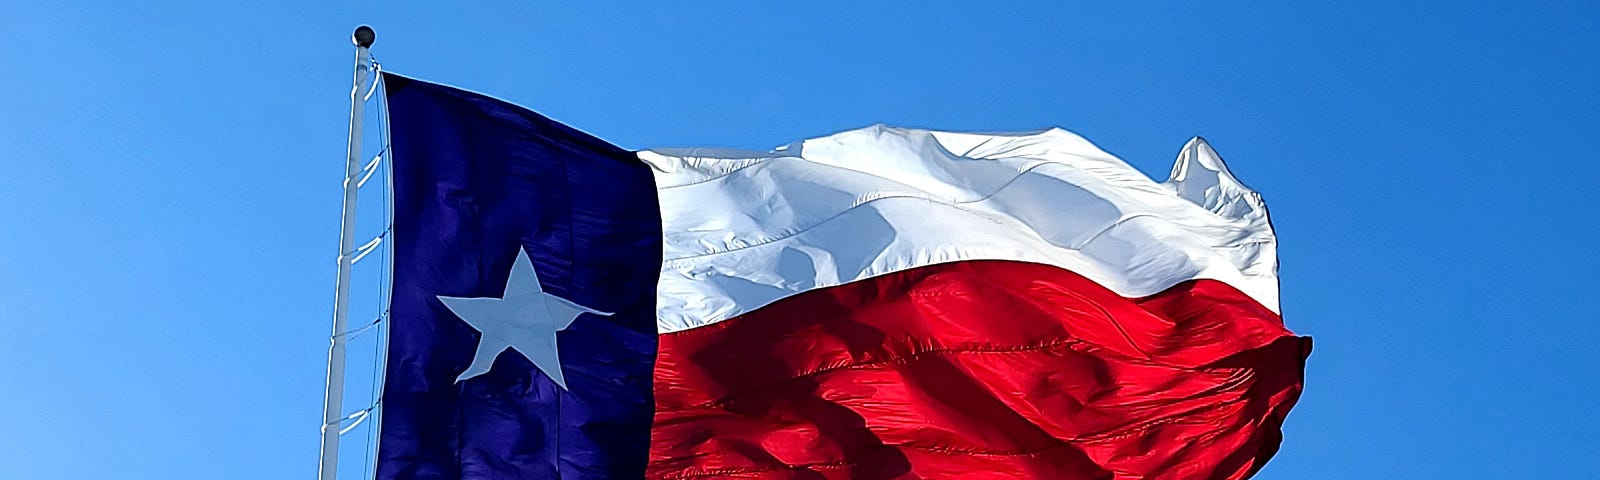 Texas Flag flying in the wind; one white star on a blue field with a large white section over a large red section.